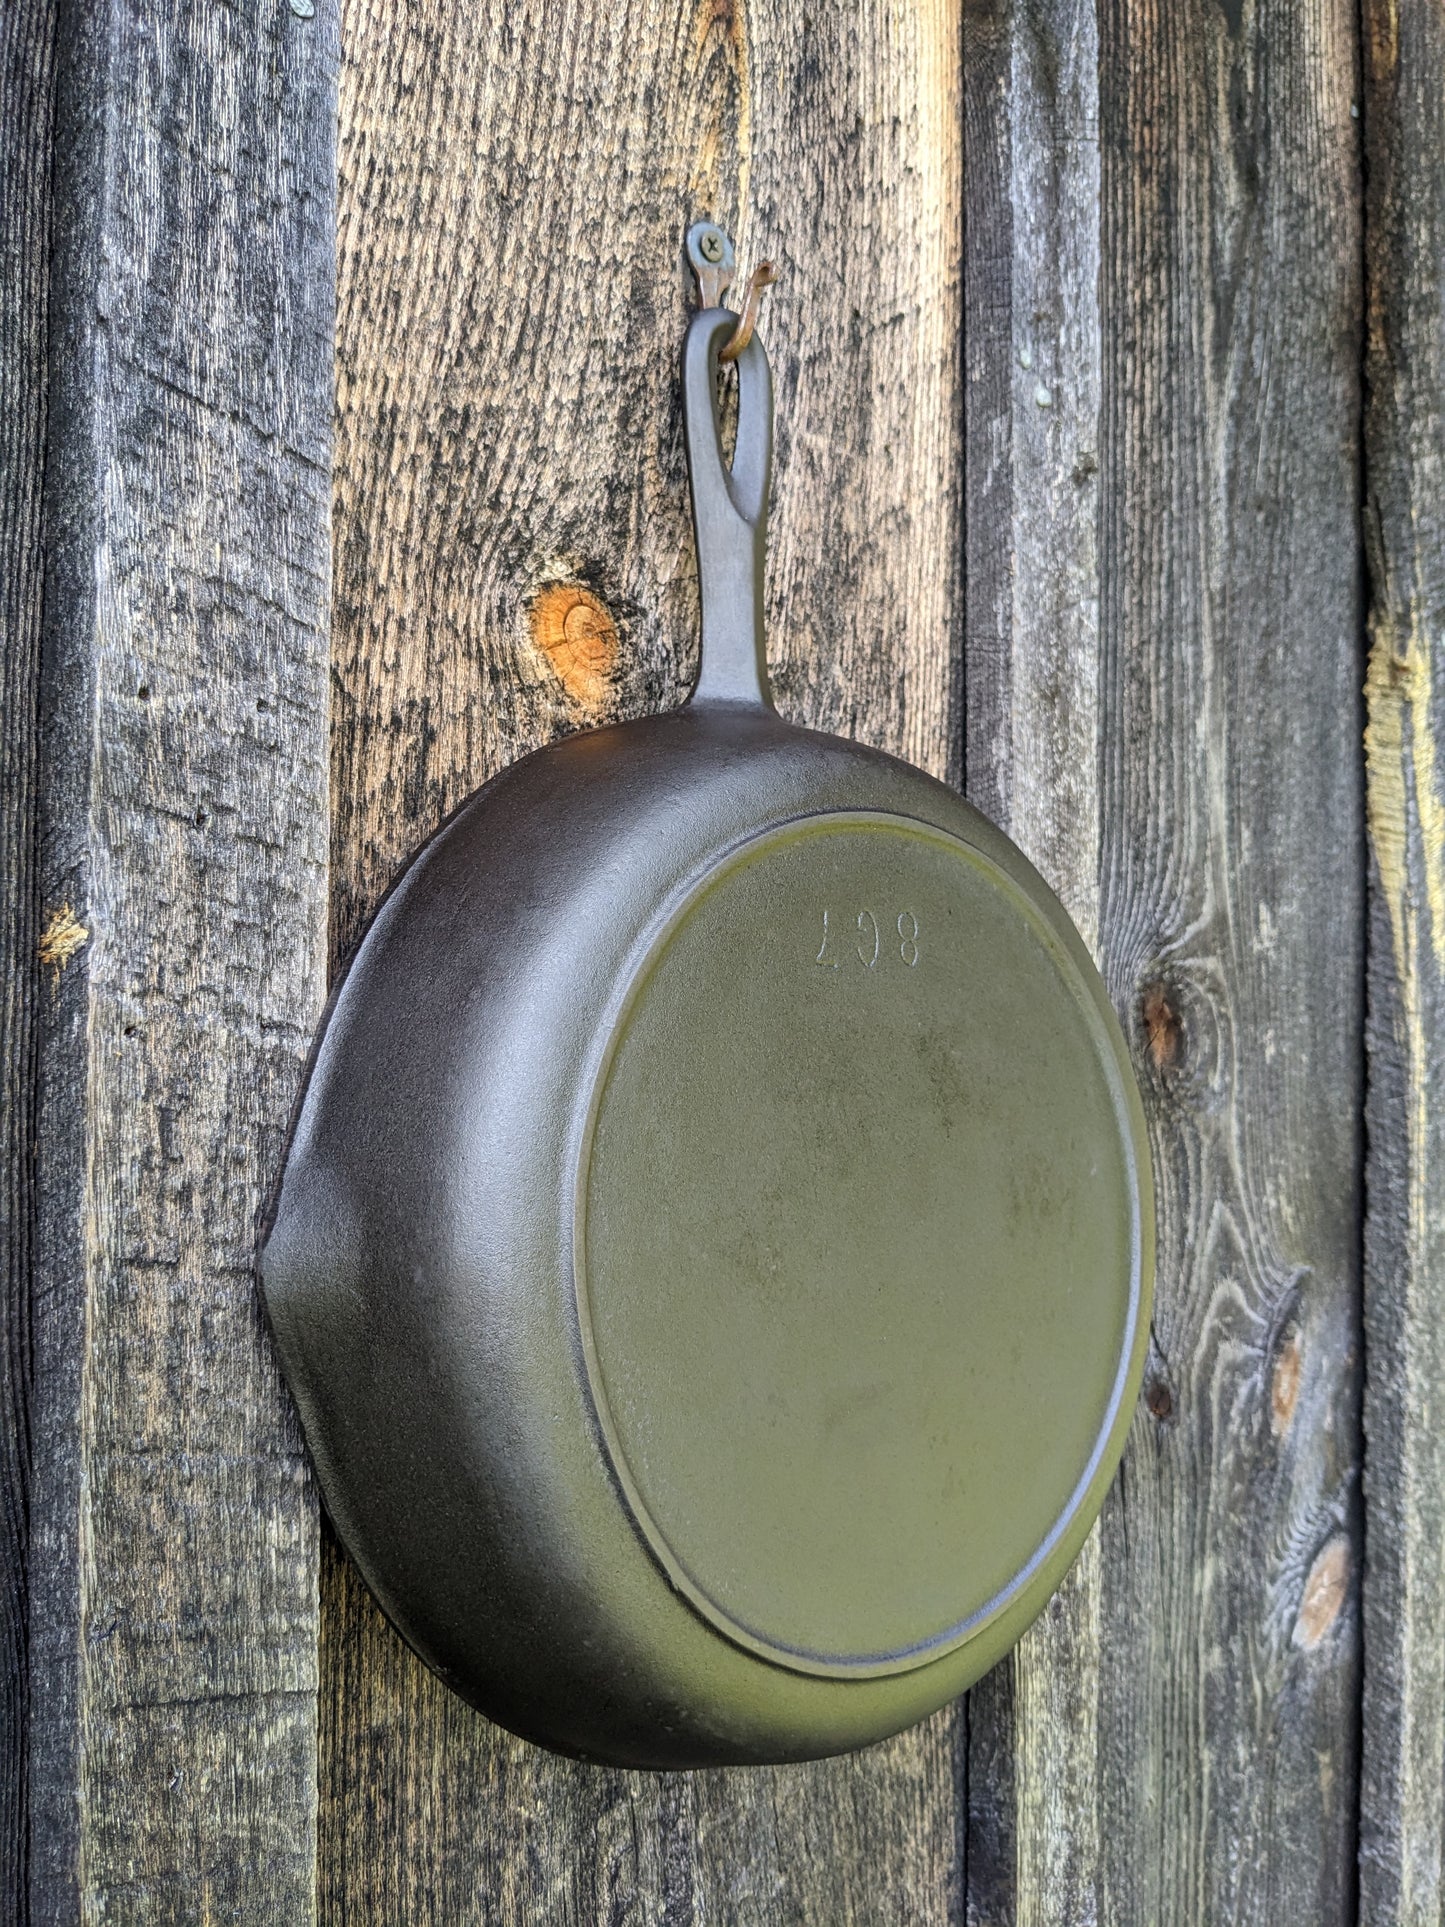 BSR Red Mountain #8 Cast Iron Skillet with Lid